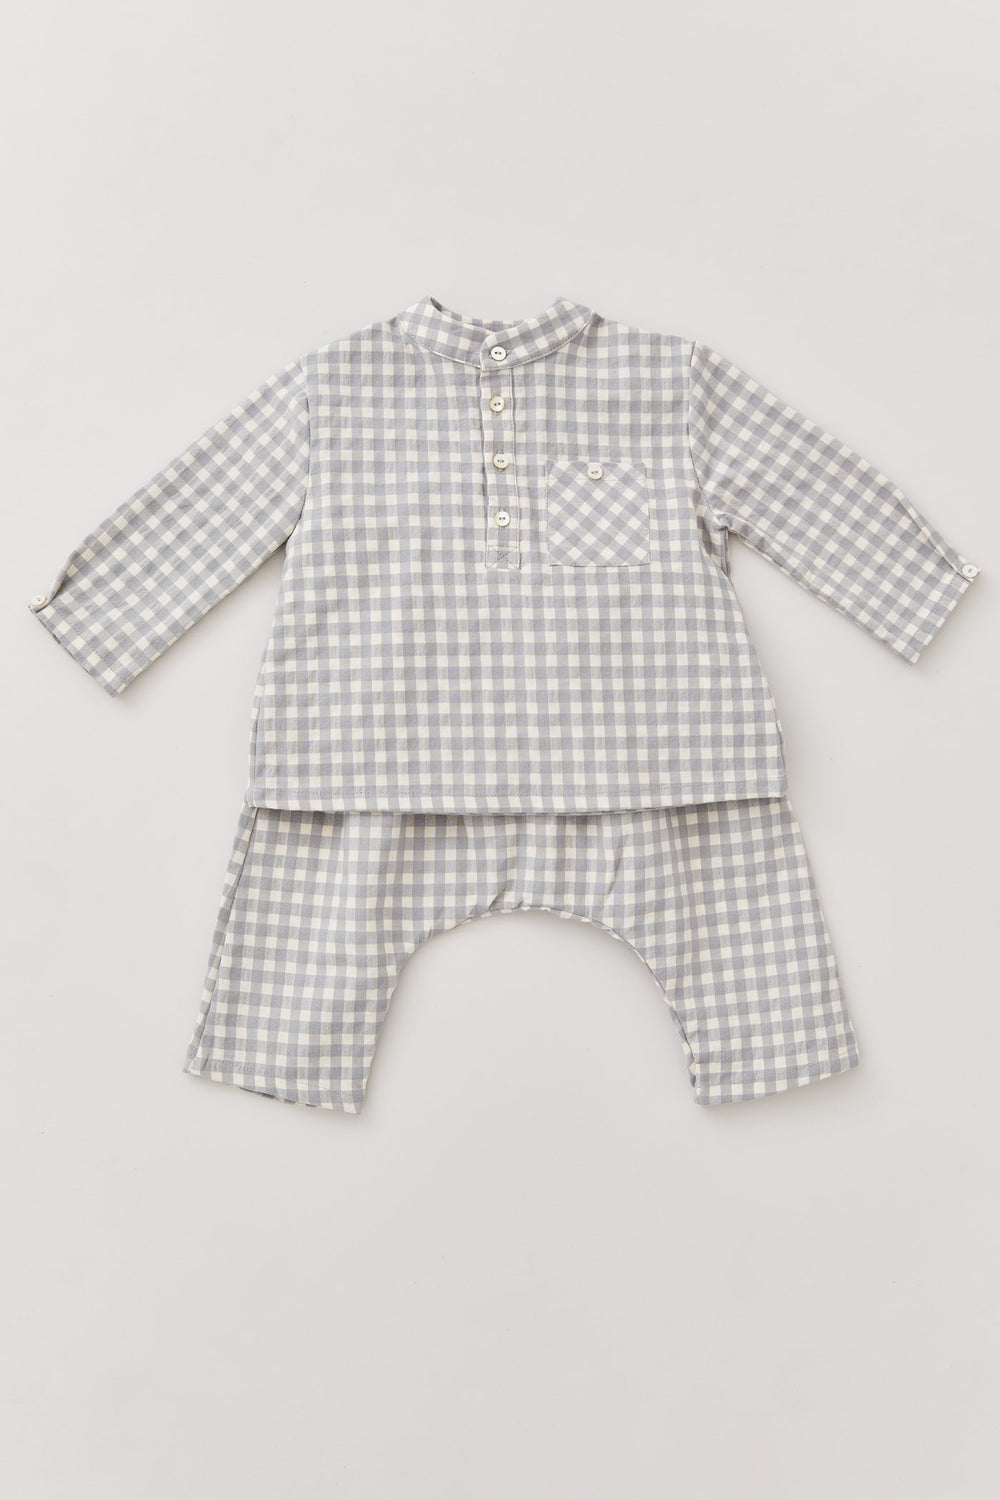 Baby Apple Trousers Cream Grey Check - Designed by Ingrid Lewis - Strawberries & Cream